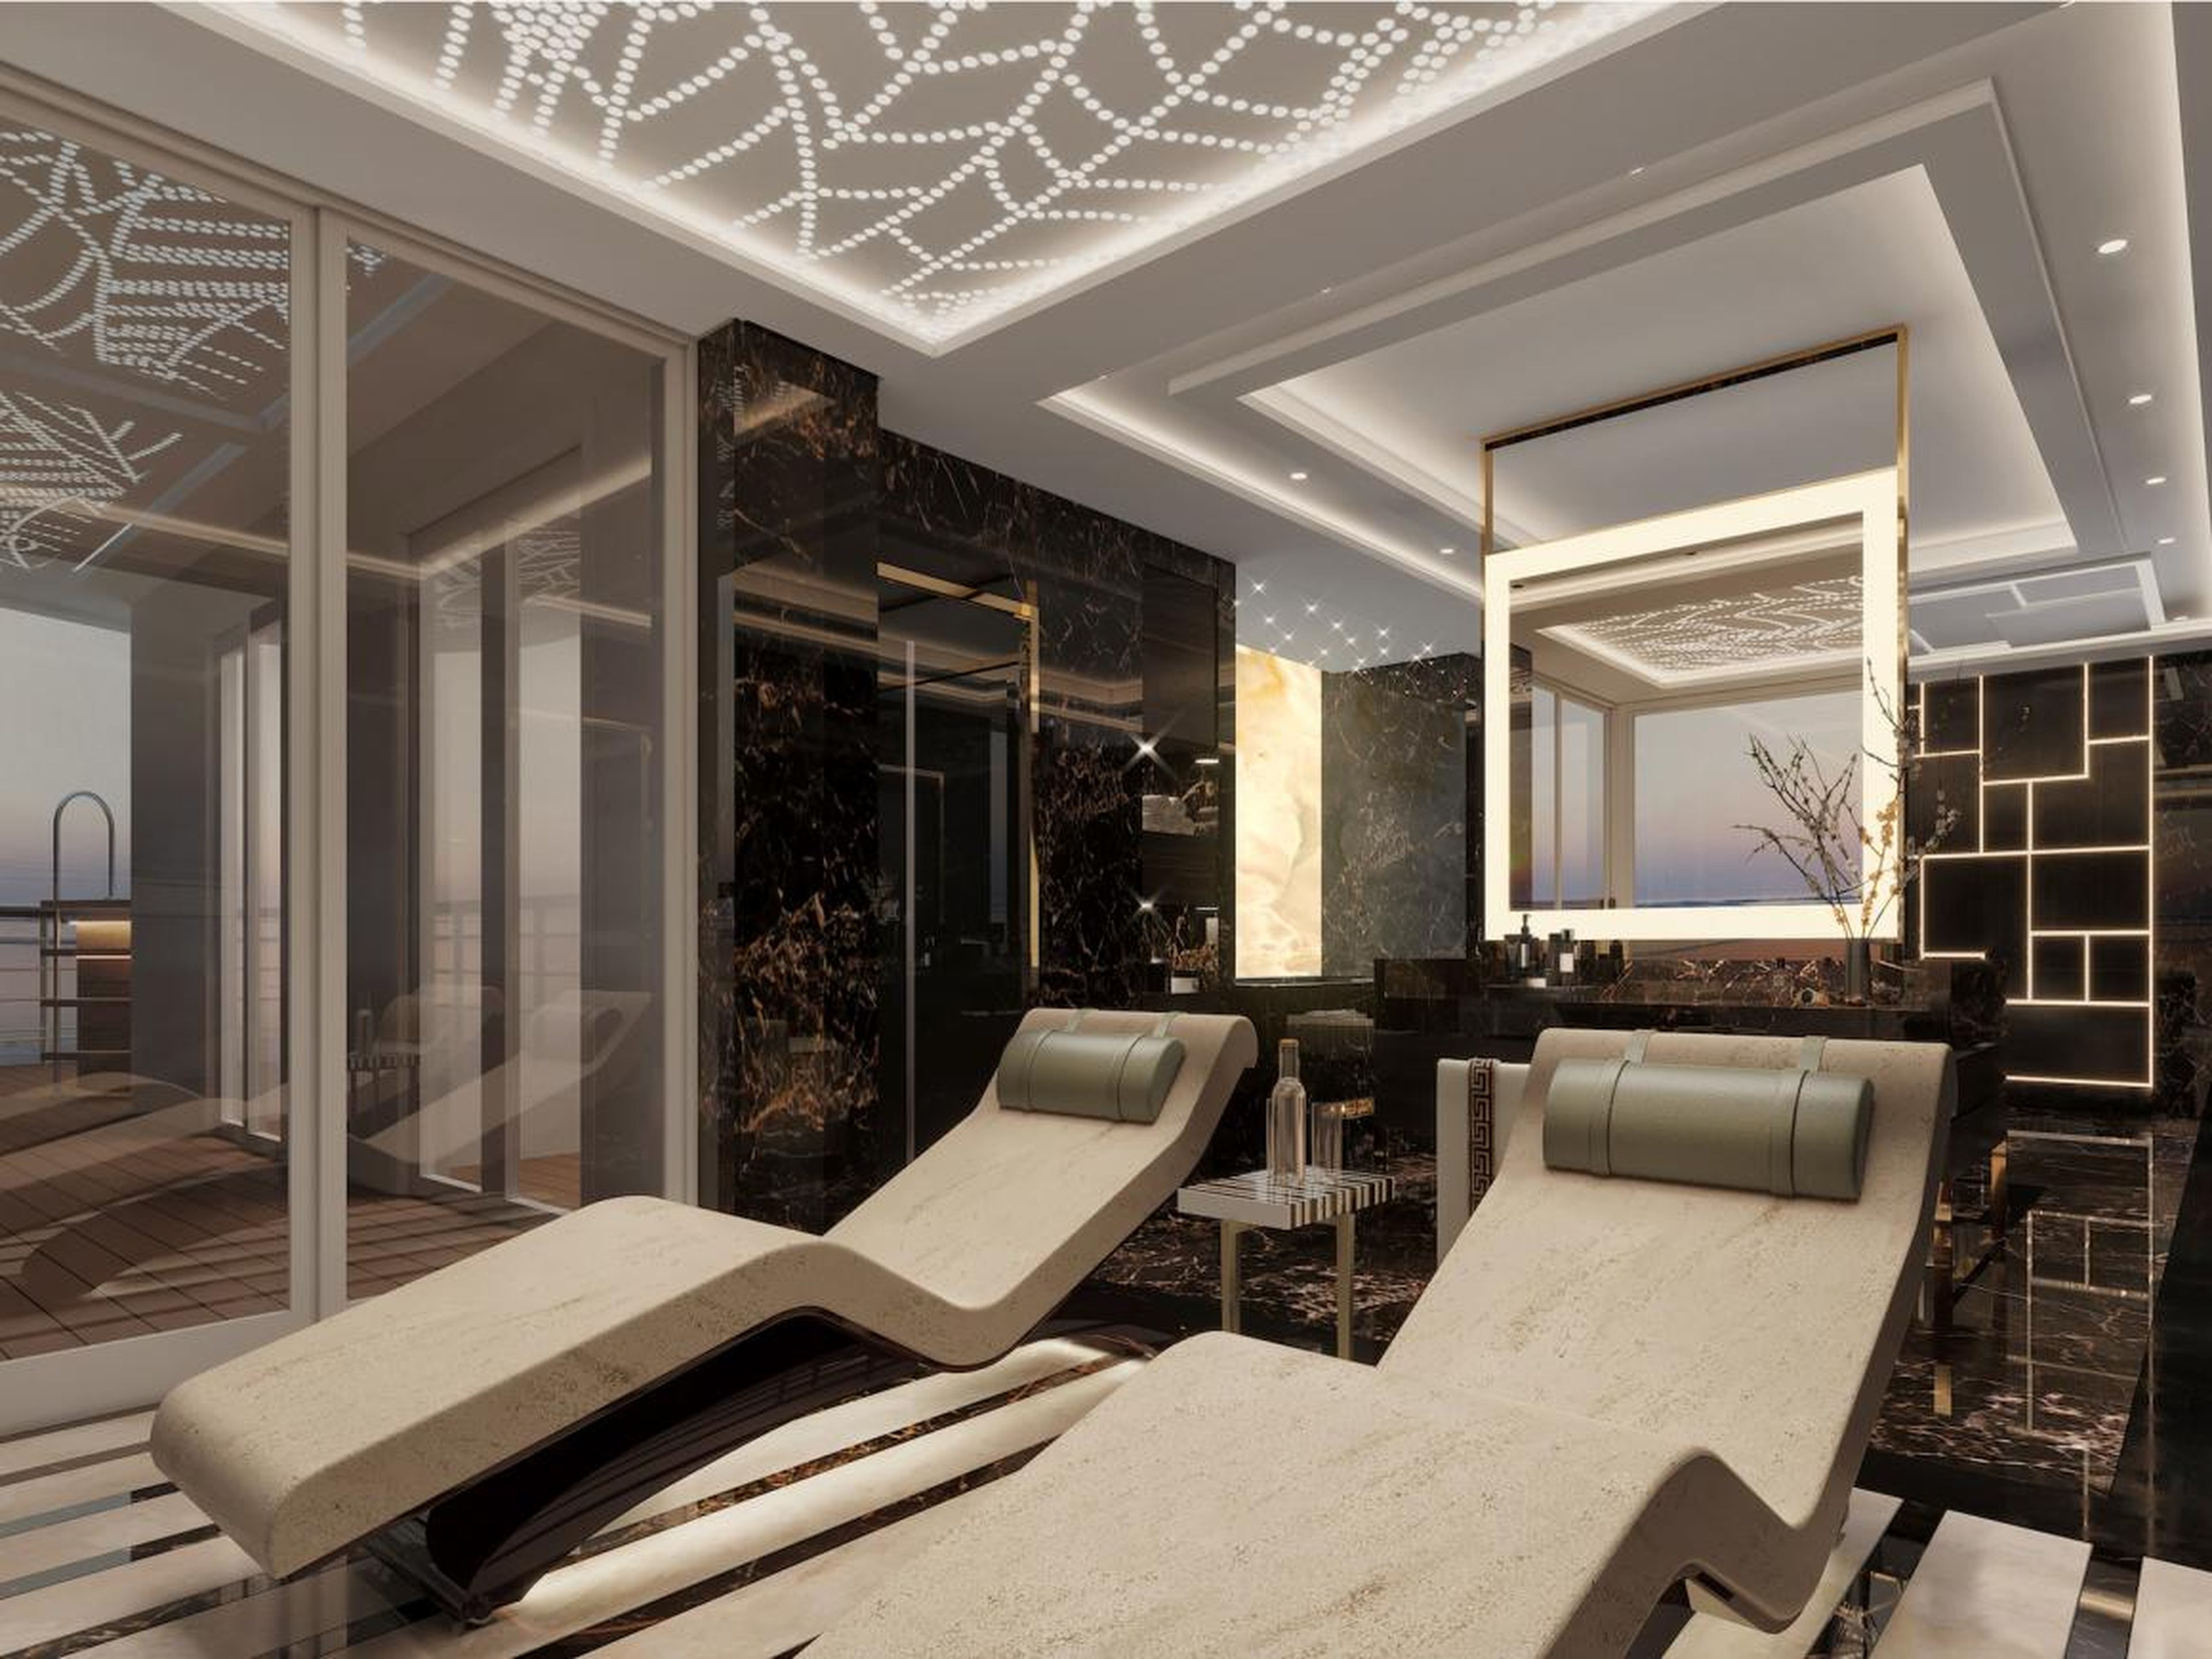 The Regent Suite will be able to hold six passengers and starts at $11,000 per night.